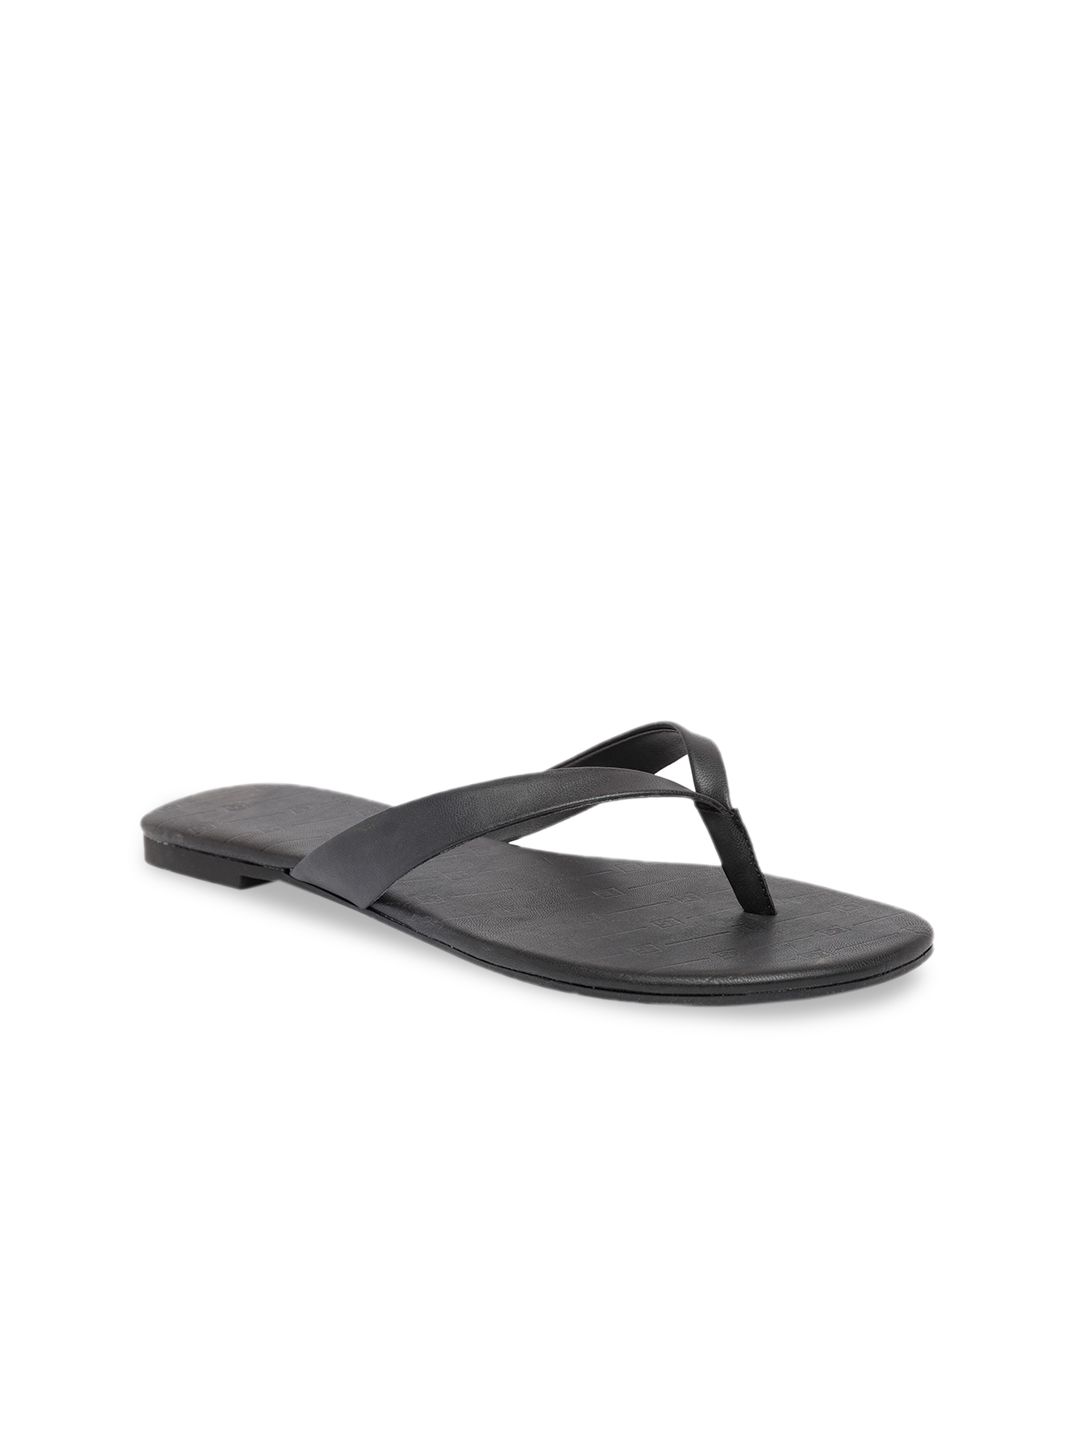 Call It Spring Women Black Solid Thong Flip Flops Price in India